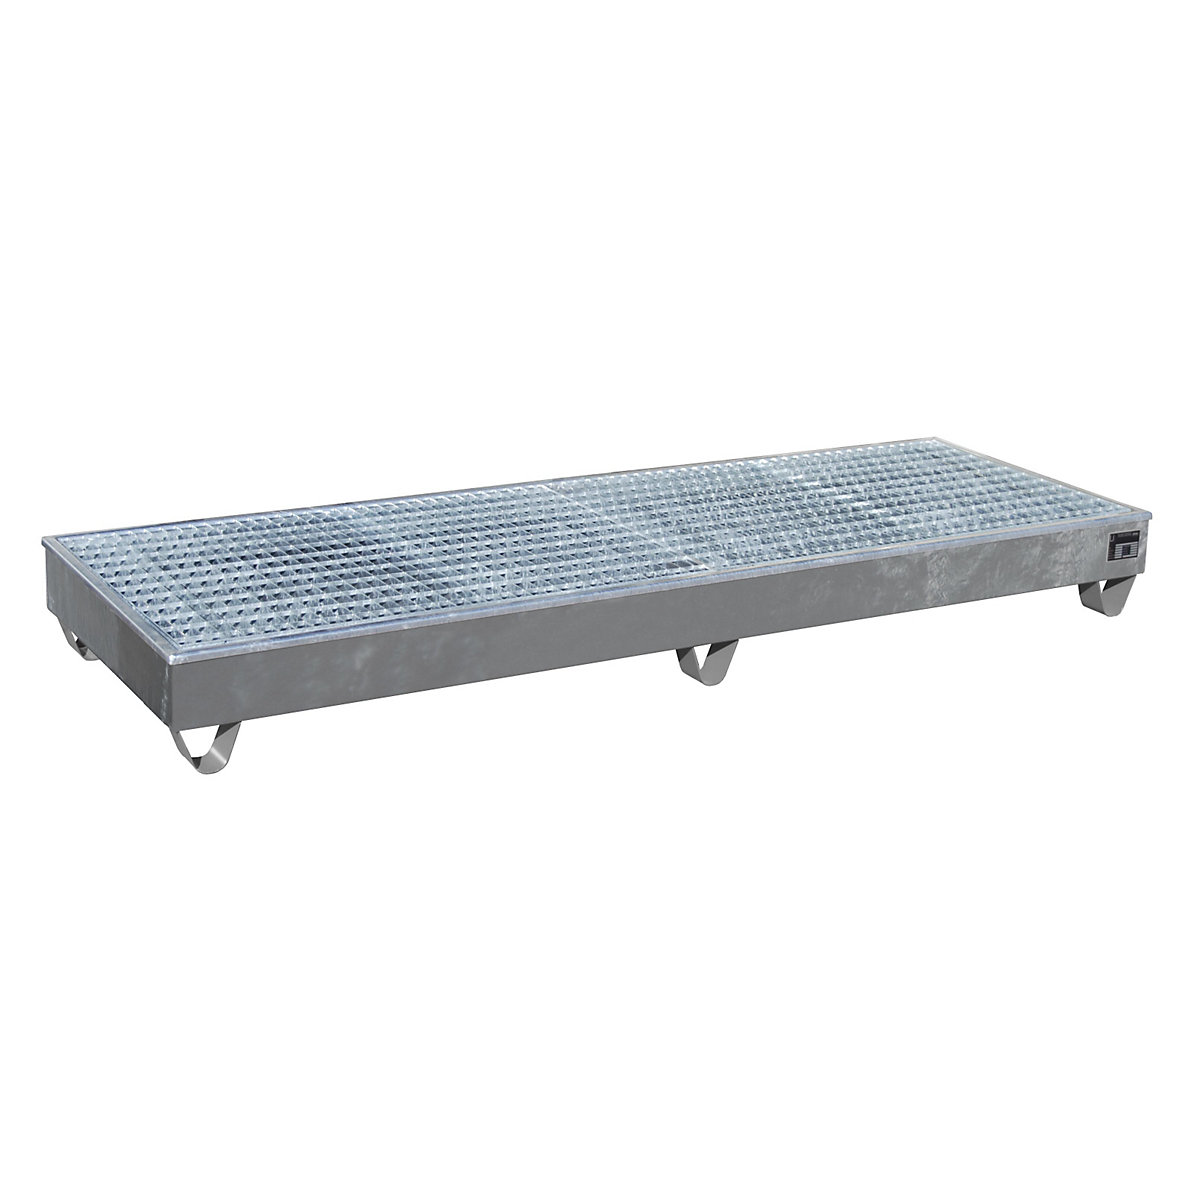 Steel sump tray with PE insert – eurokraft pro, capacity 200 litres, LxWxH 2412 x 812 x 253 mm, zinc plated-9